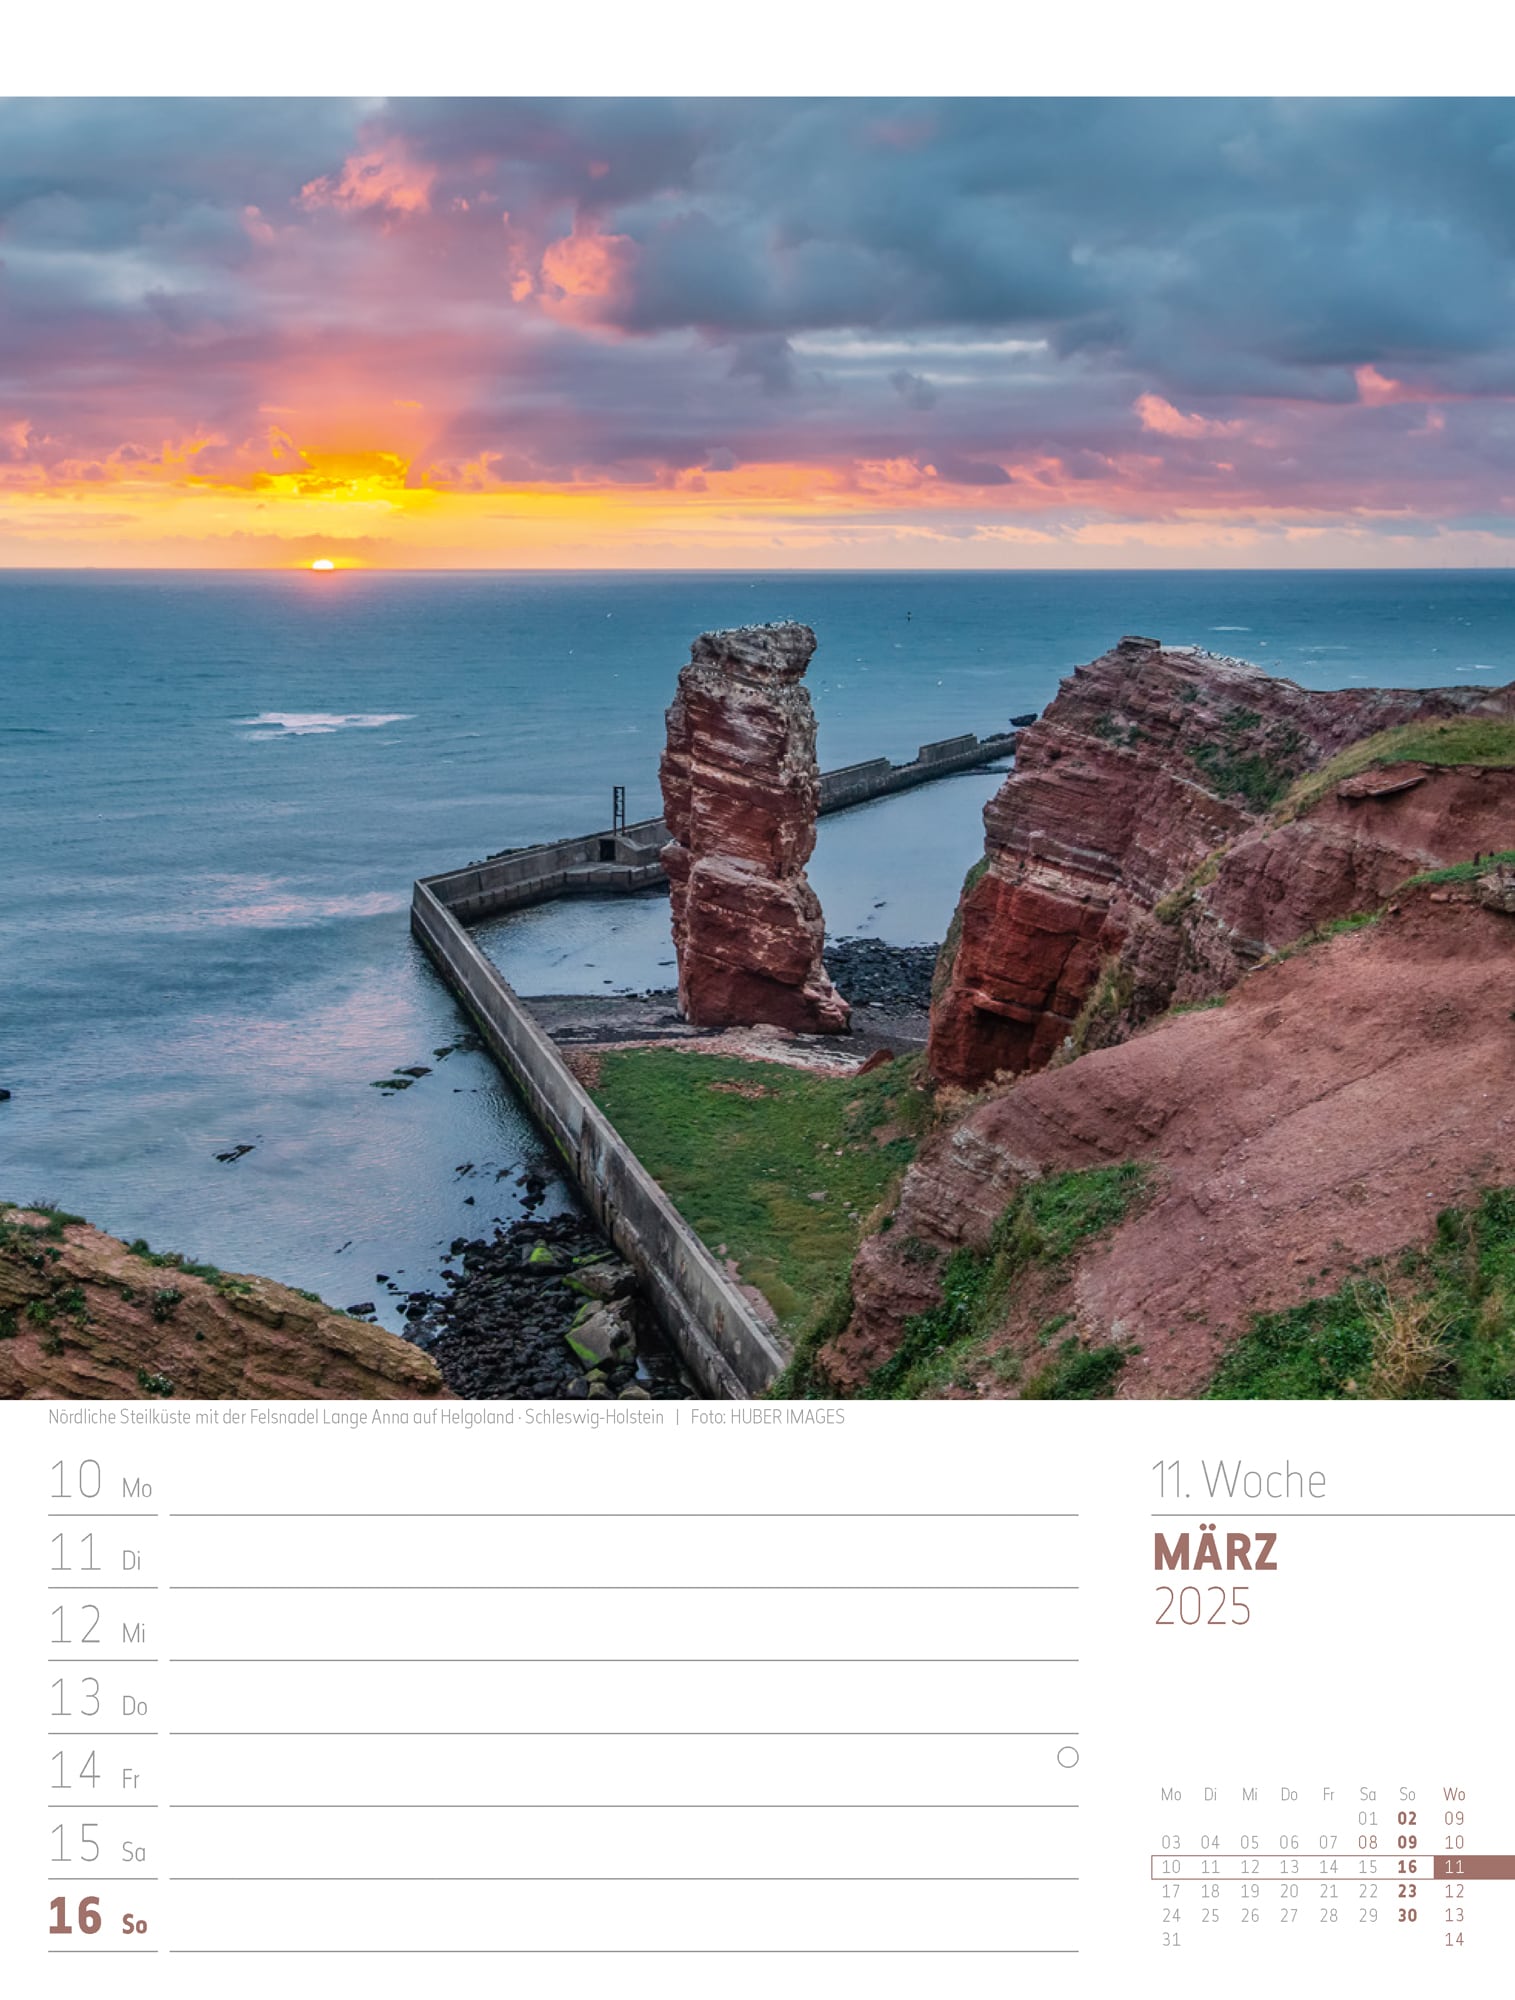 Ackermann Calendar Discover Germany 2025 - Weekly Planner - Inside View 14